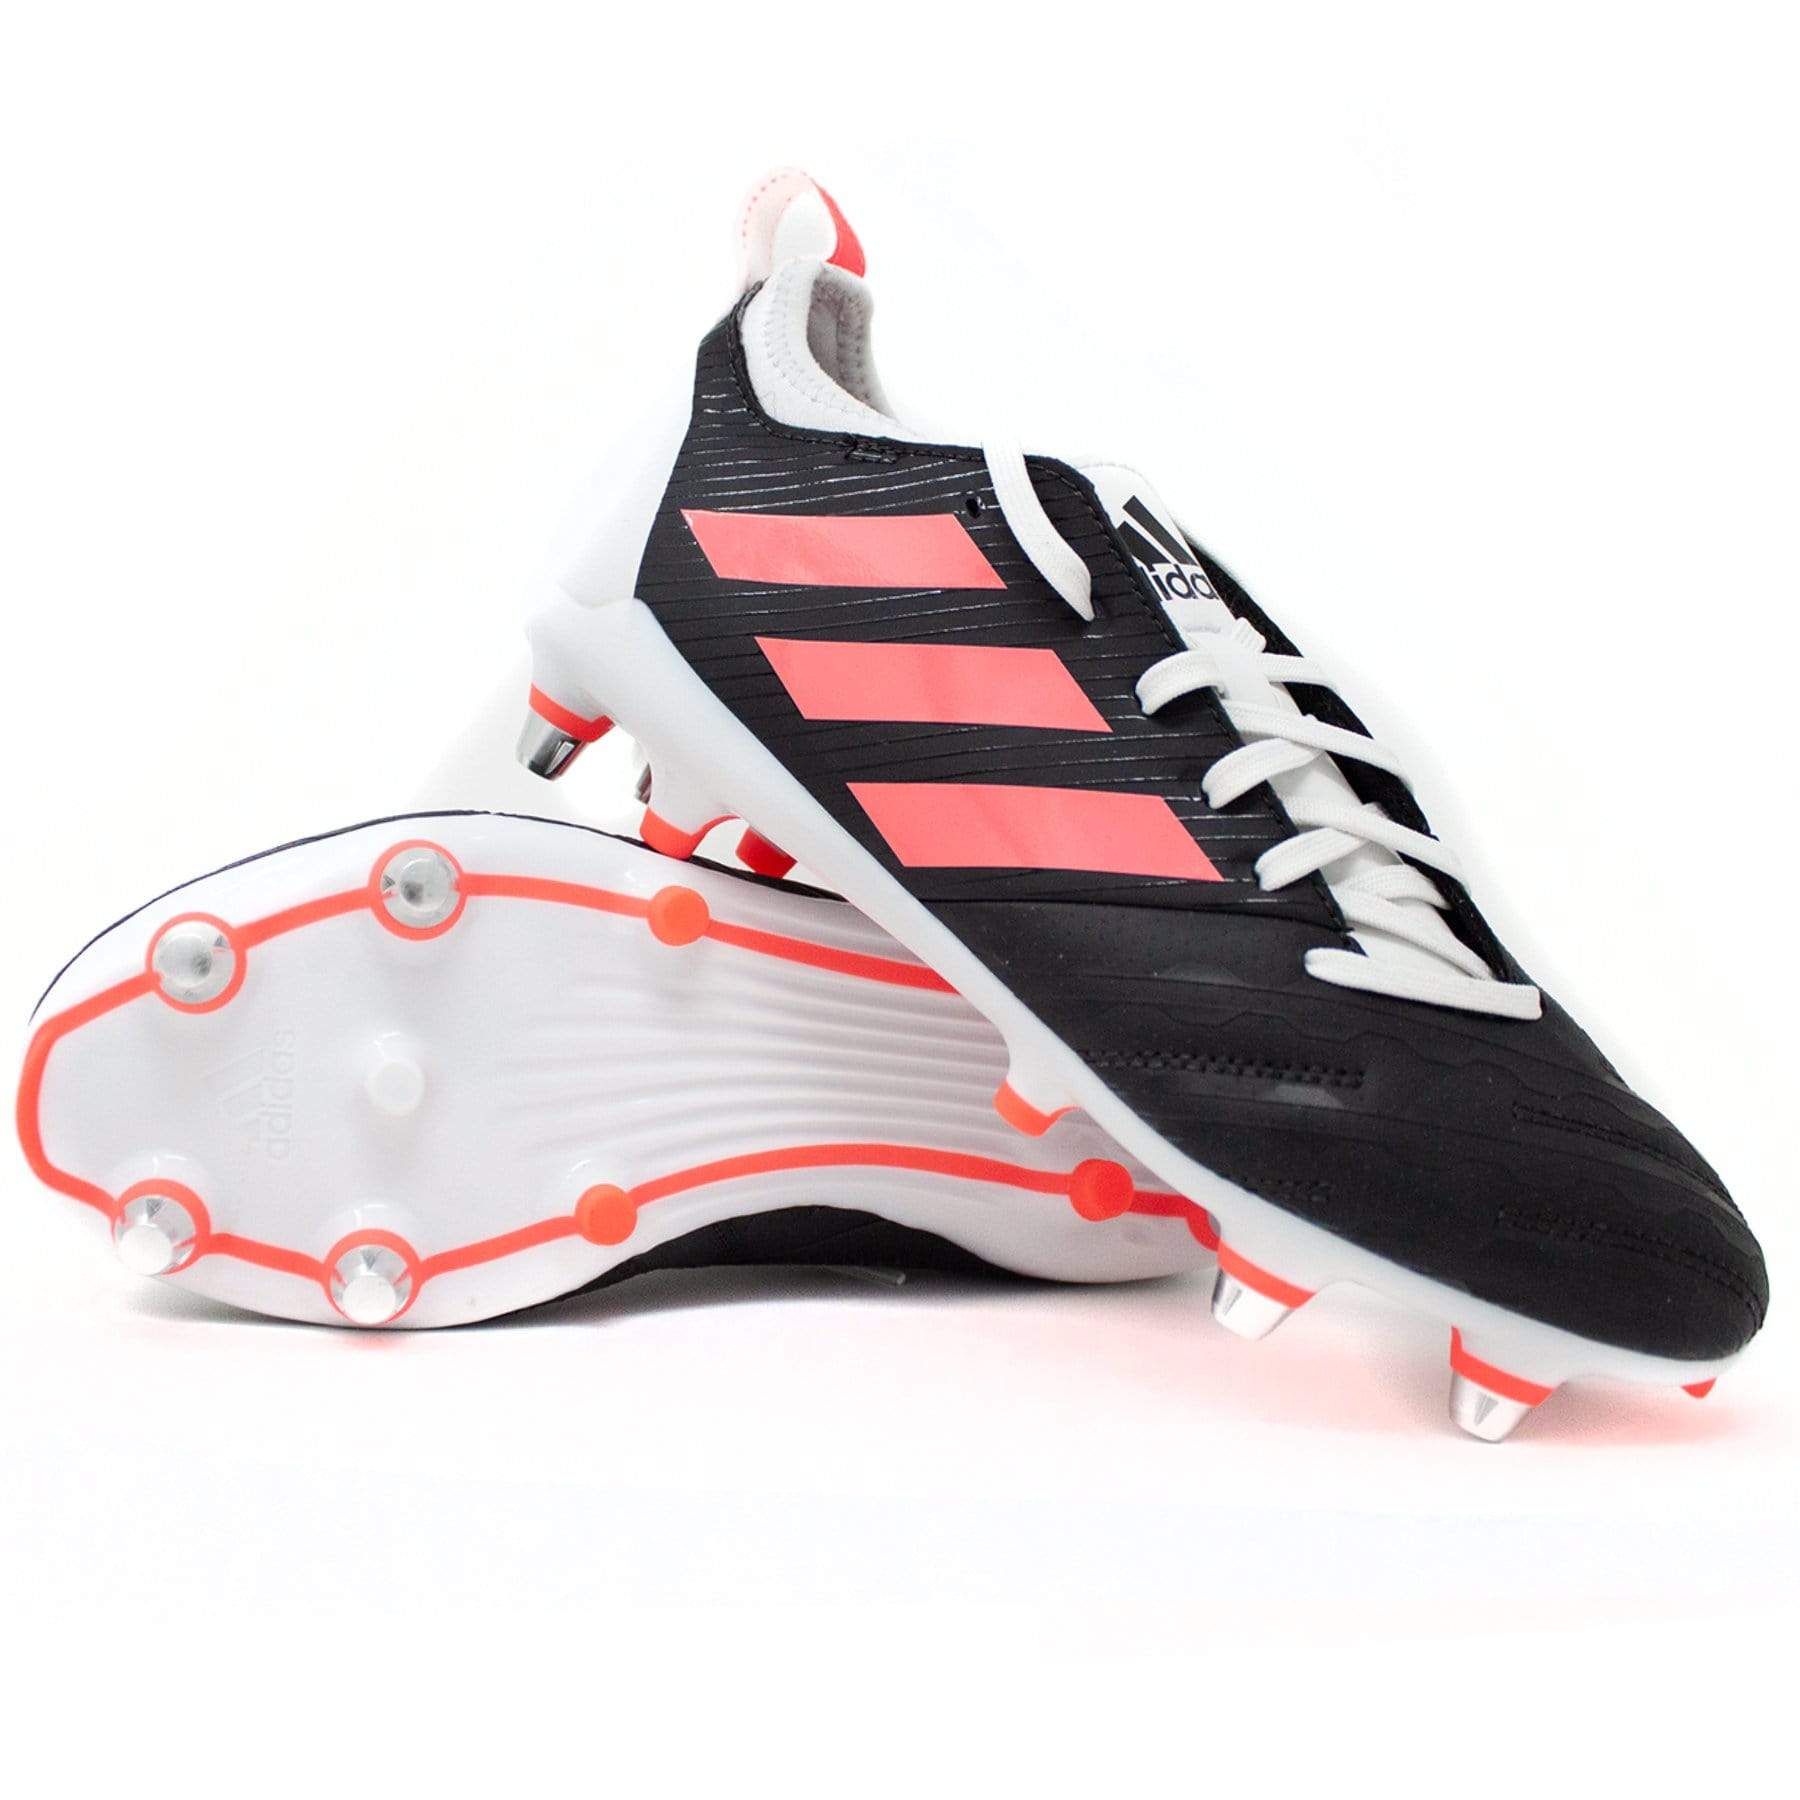 medio litro mezcla Valle Adidas Malice Elite Rugby Cleat - Soft Ground Boot - Core Black/ Signal  Pink/ Crystal White - SKU FU8219 - World Rugby Shop